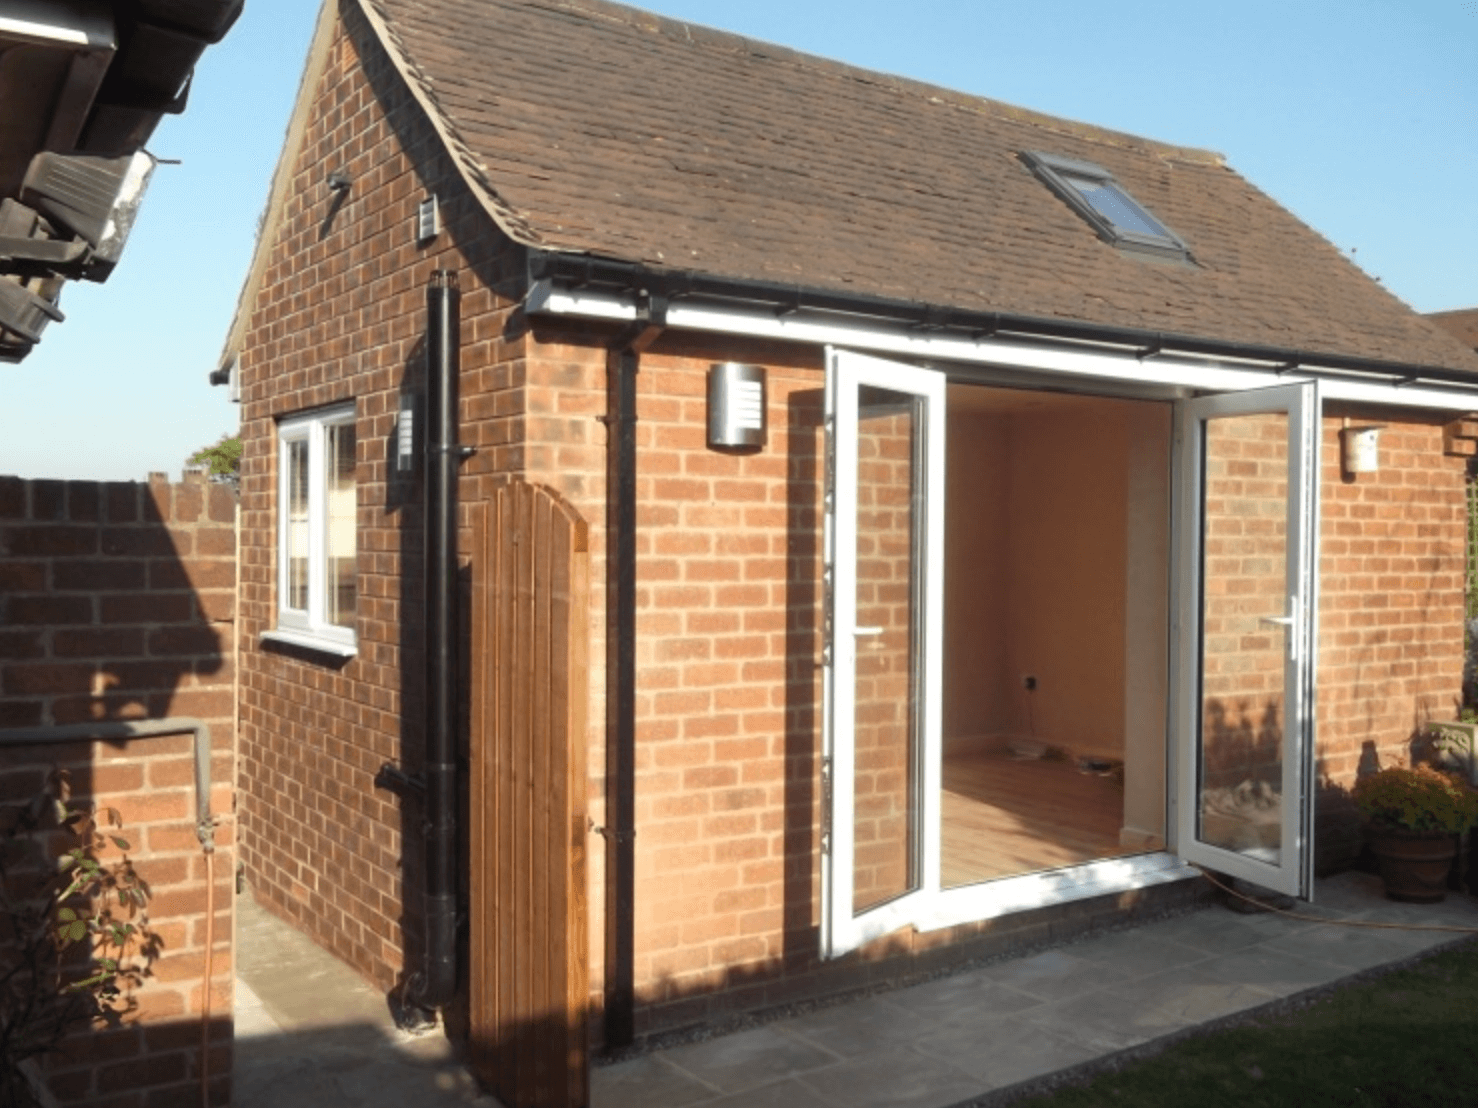 Garage Conversion Cost Sheffield, How Much Does Garage Conversion Cost Uk